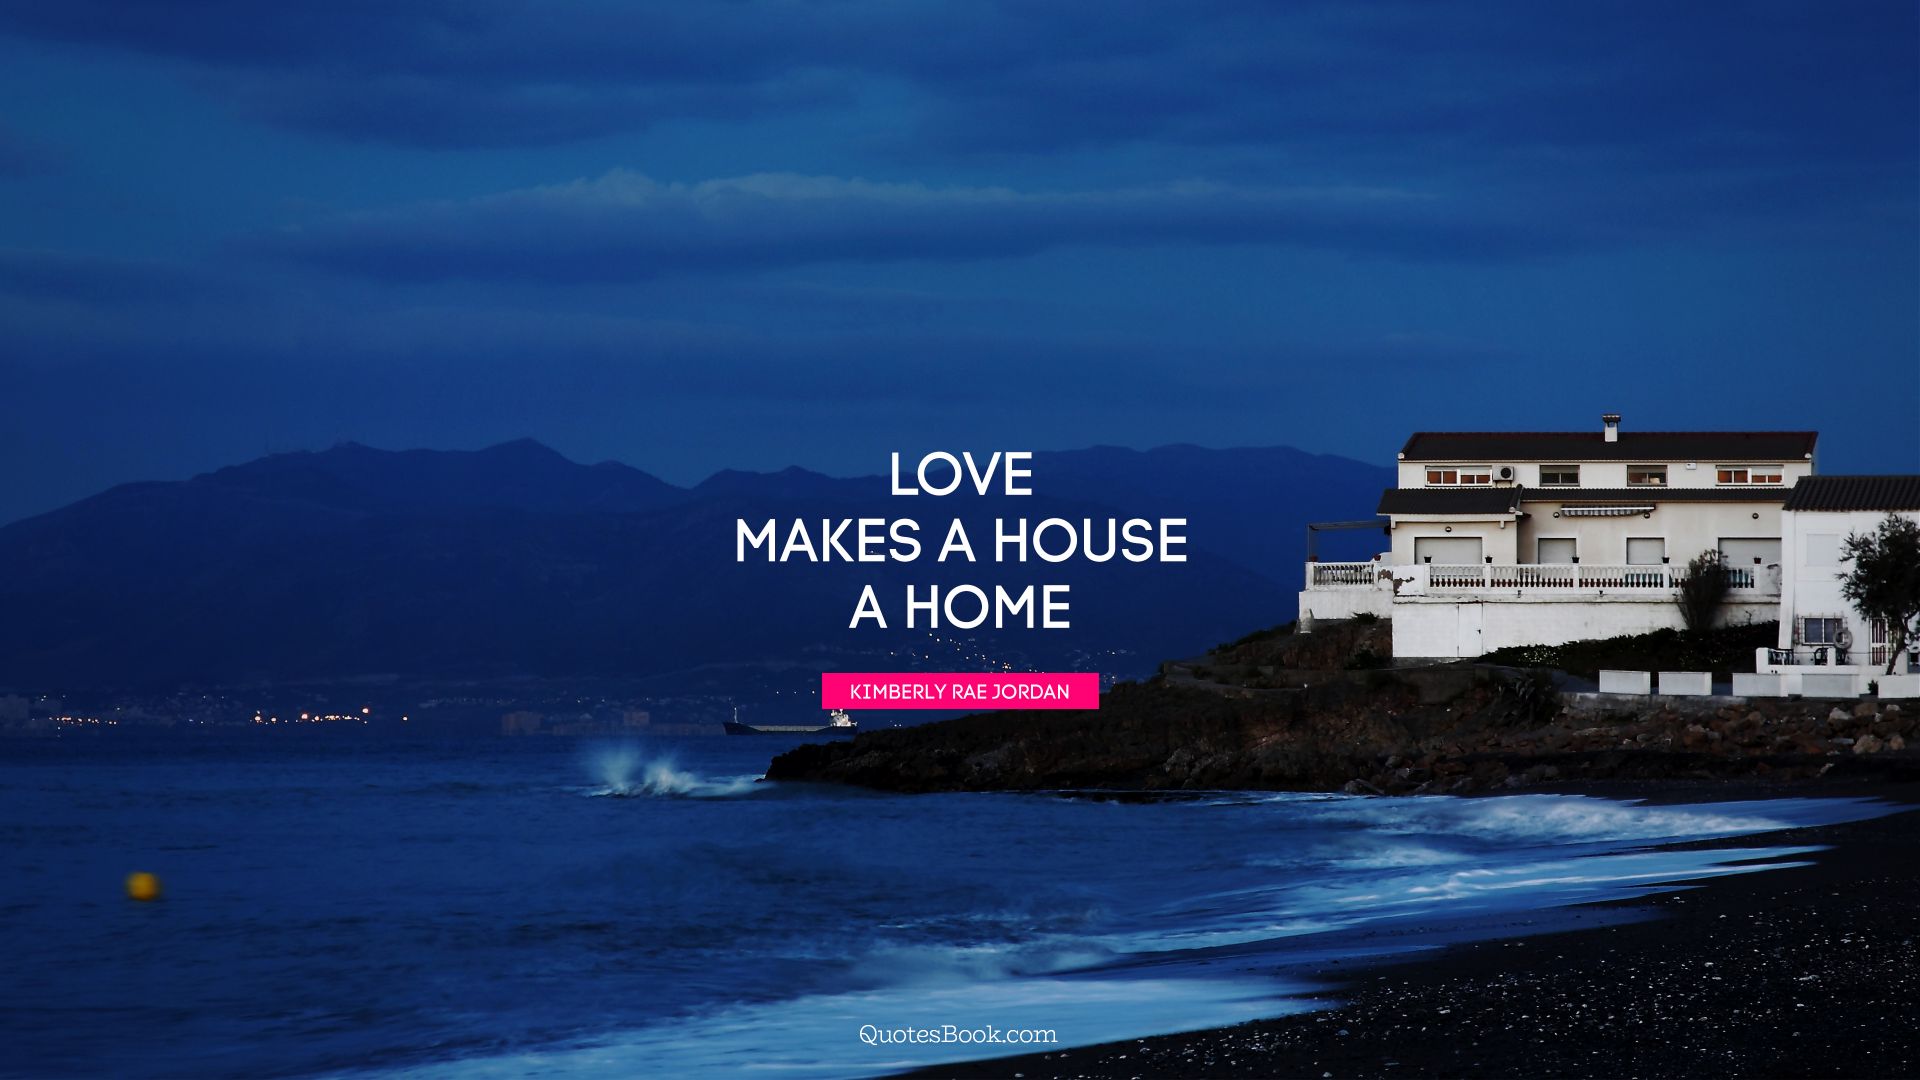 Love makes a house a home. - Quote by Kimberly Rae Jordan